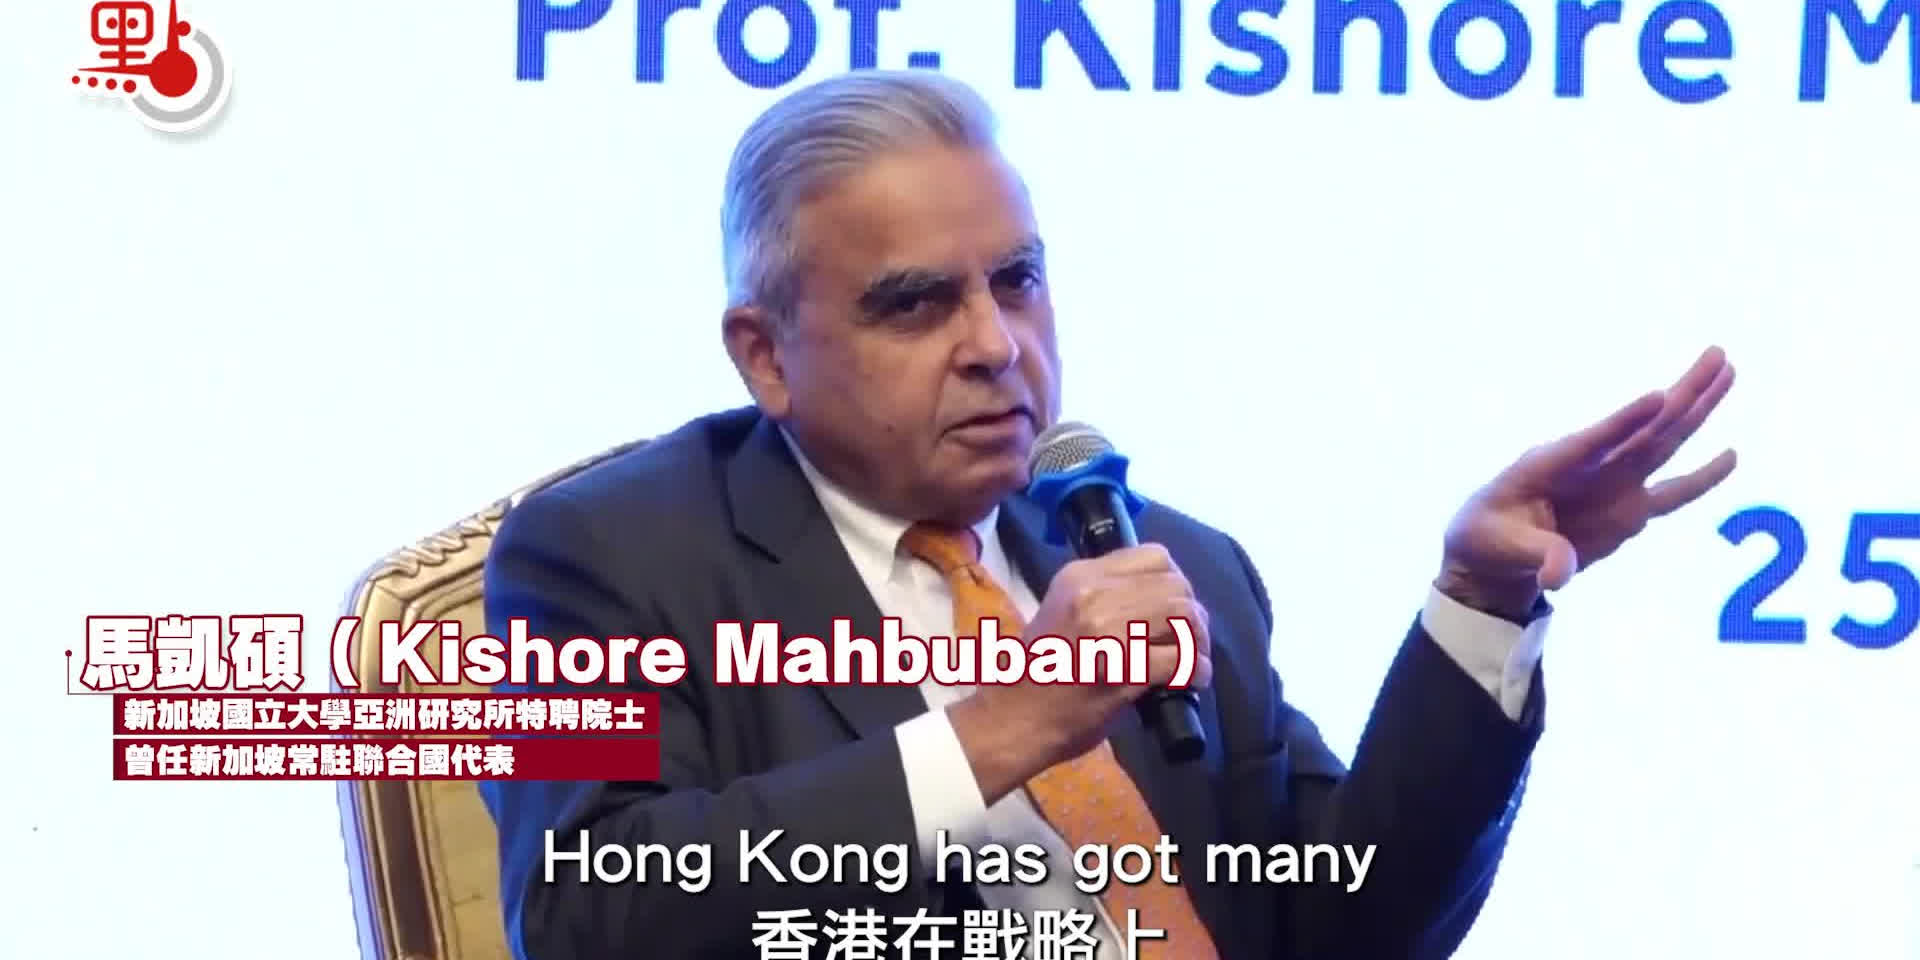 Watch This | Kishore Mahbubani: Imperative for world to see HK still enjoys autonomy under 'one country, two systems'